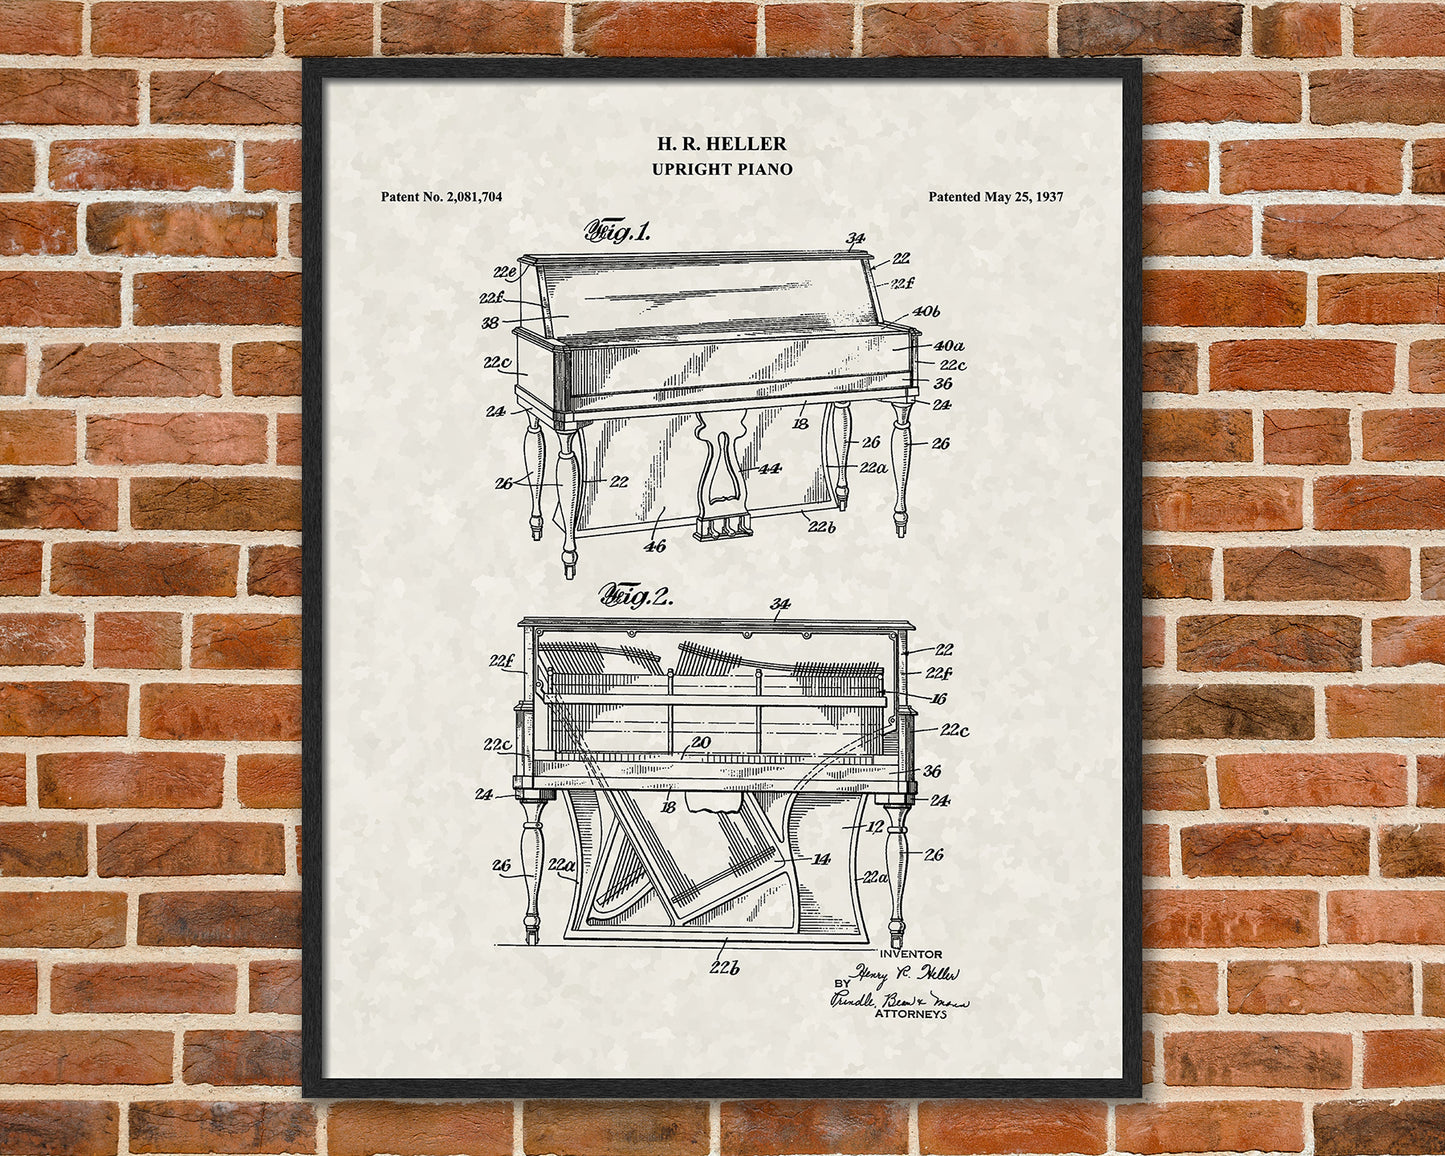 Upright Piano Patent Drawings, Music Studio Wall Art Poster, Great Vintage Room Decor, Art Prints, Musician Decor Gifts 03082